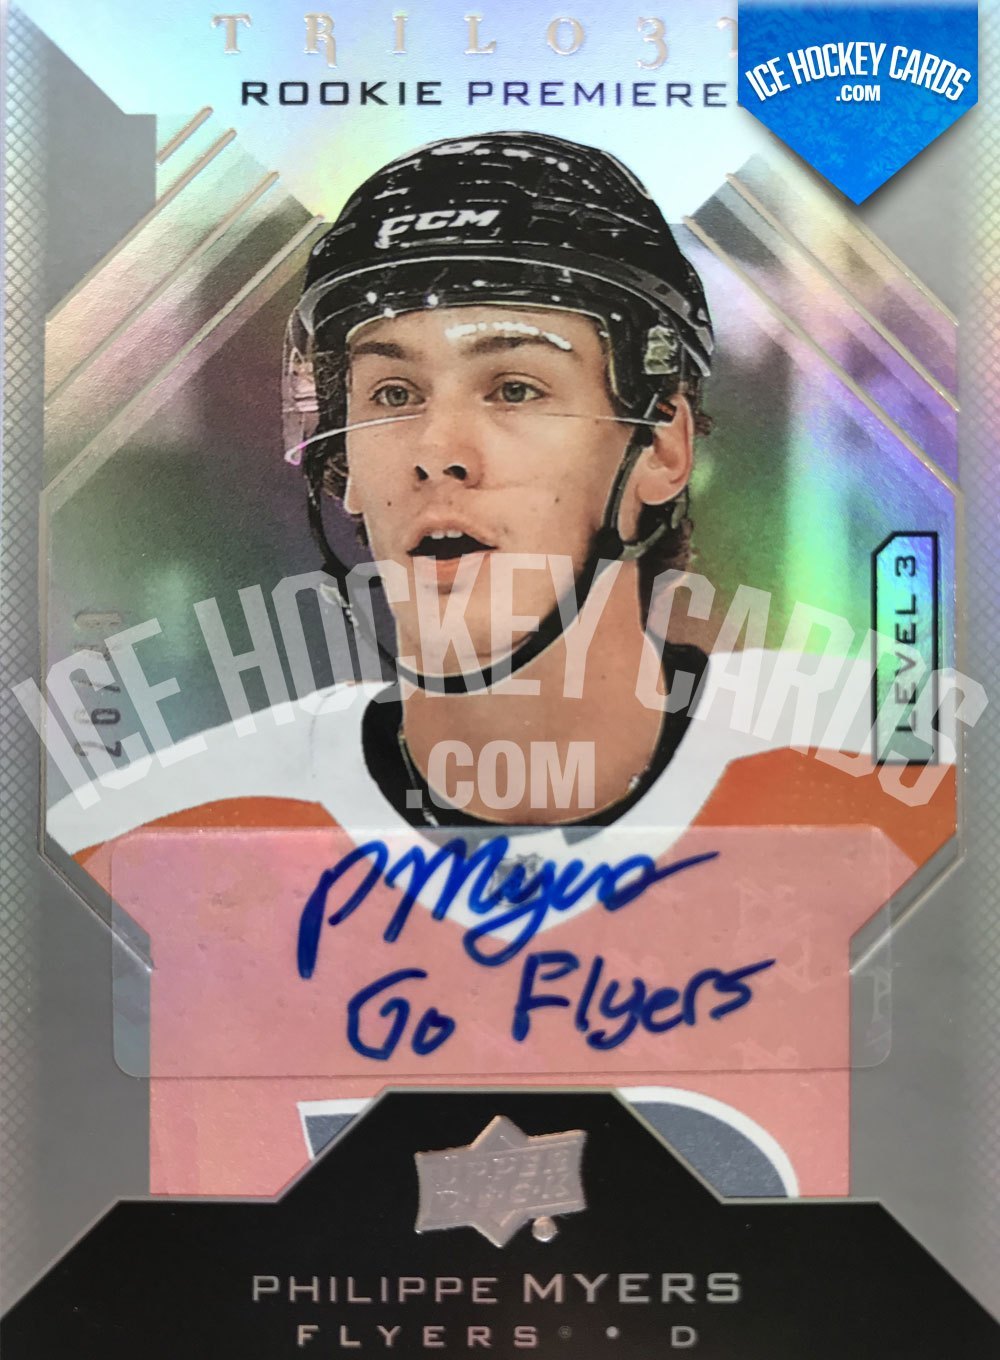 Upper Deck - Trilogy 19-20 - Philippe Myers Rookie Premieres Level 3 Autograph with "Go Flyers" 26/40